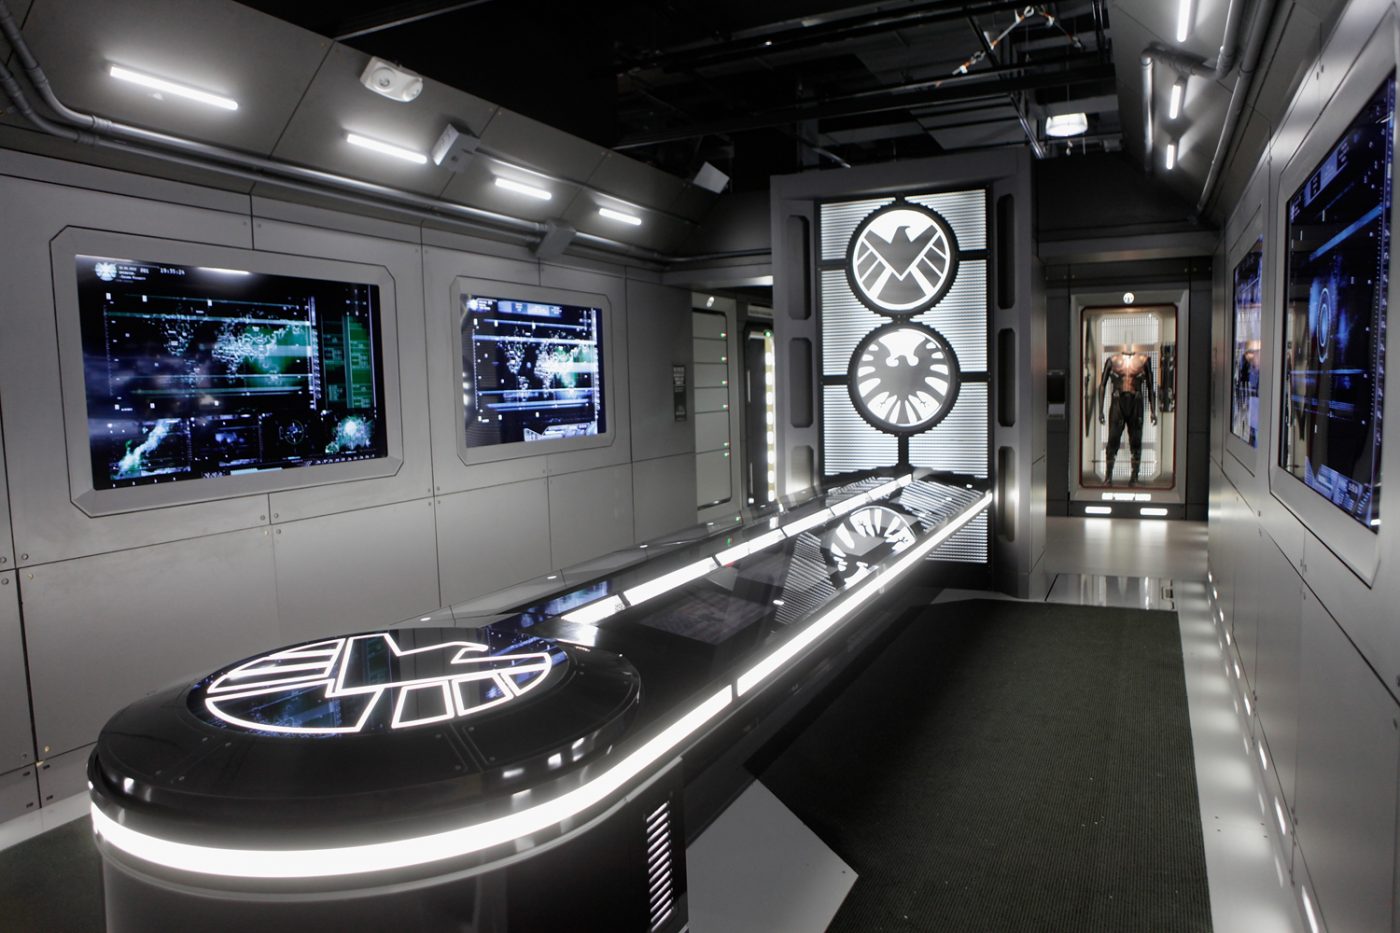 Discovery Times Square's AVENGERS S.T.A.T.I.O.N. is impressive, underwhelming